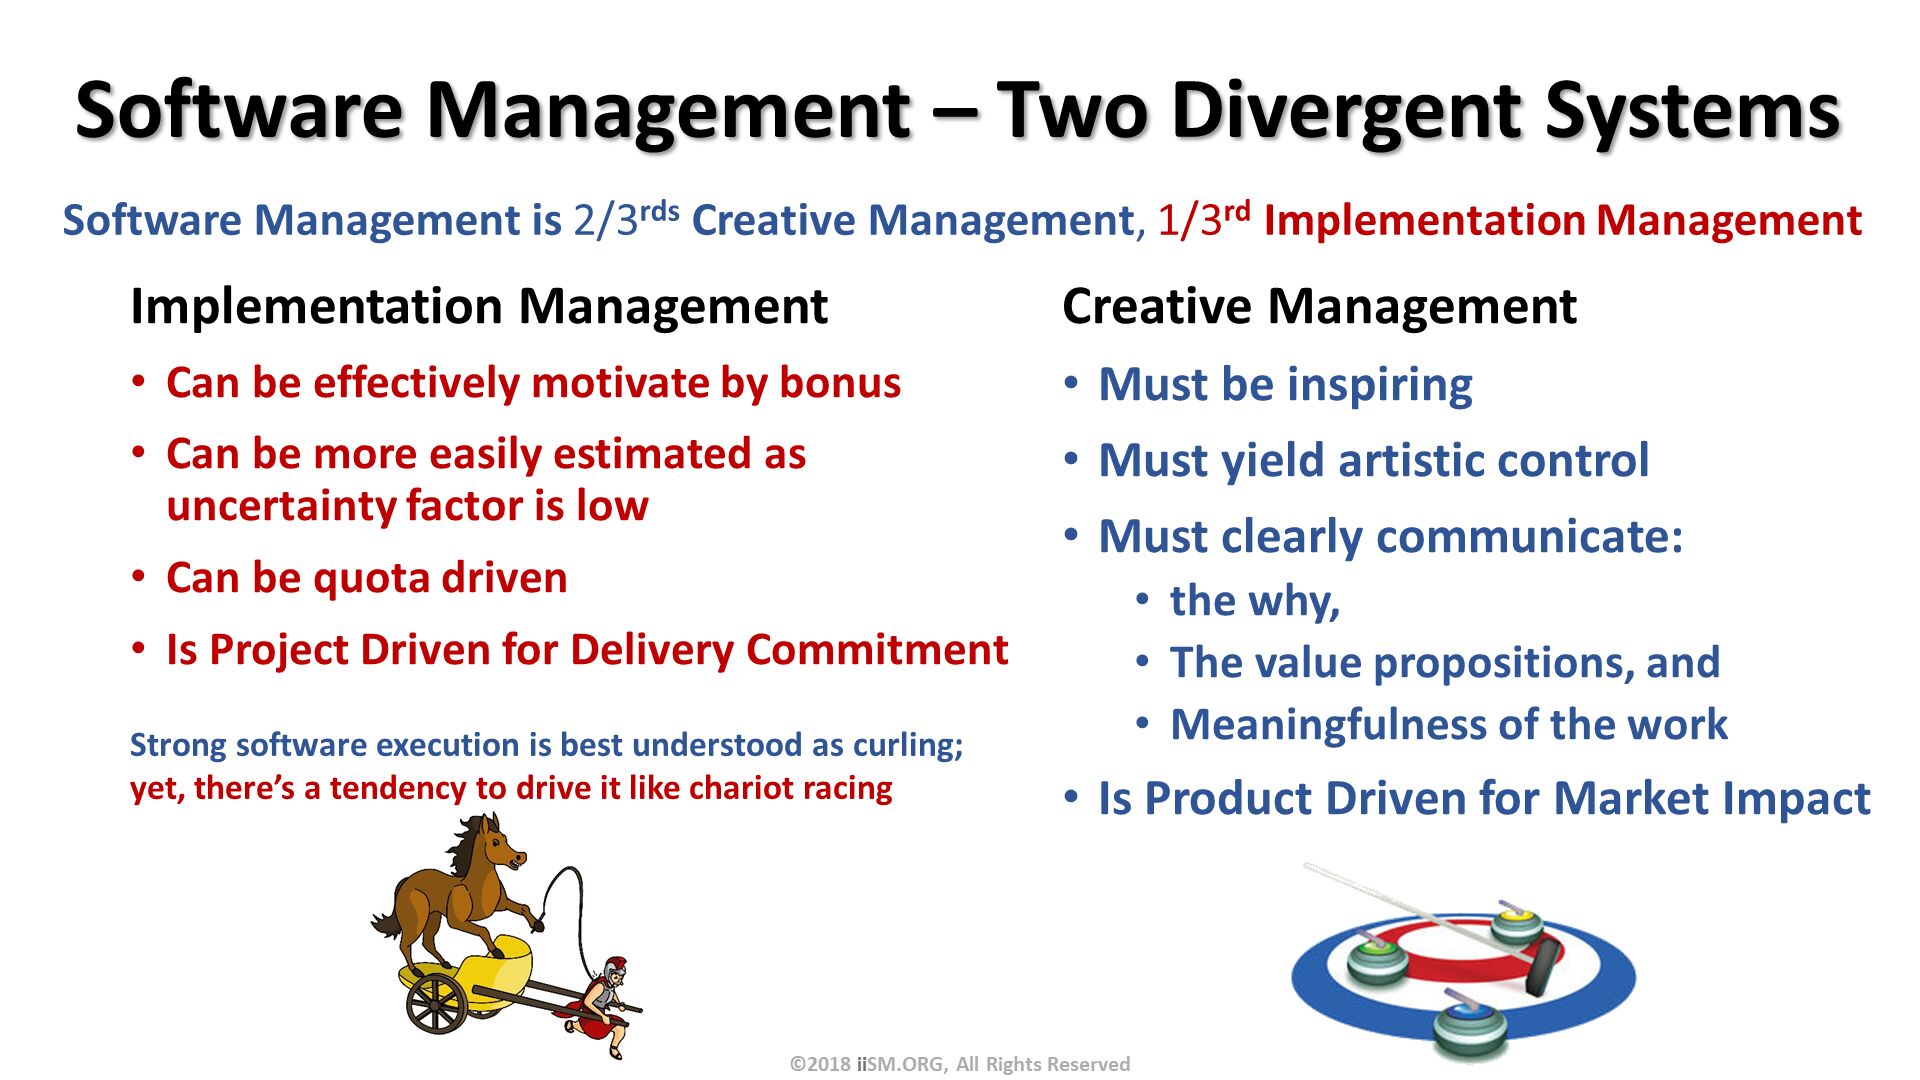 Software Management – Two Divergent Systems. Implementation Management
Can be effectively motivate by bonus
Can be more easily estimated as uncertainty factor is low
Can be quota driven
Is Project Driven for Delivery Commitment
. Creative Management
Must be inspiring
Must yield artistic control
Must clearly communicate: 
the why, 
The value propositions, and 
Meaningfulness of the work
Is Product Driven for Market Impact. Software Management is 2/3rds Creative Management, 1/3rd Implementation Management. Strong software execution is best understood as curling; yet, there’s a tendency to drive it like chariot racing
. ©2018 iiSM.ORG, All Rights Reserved. 